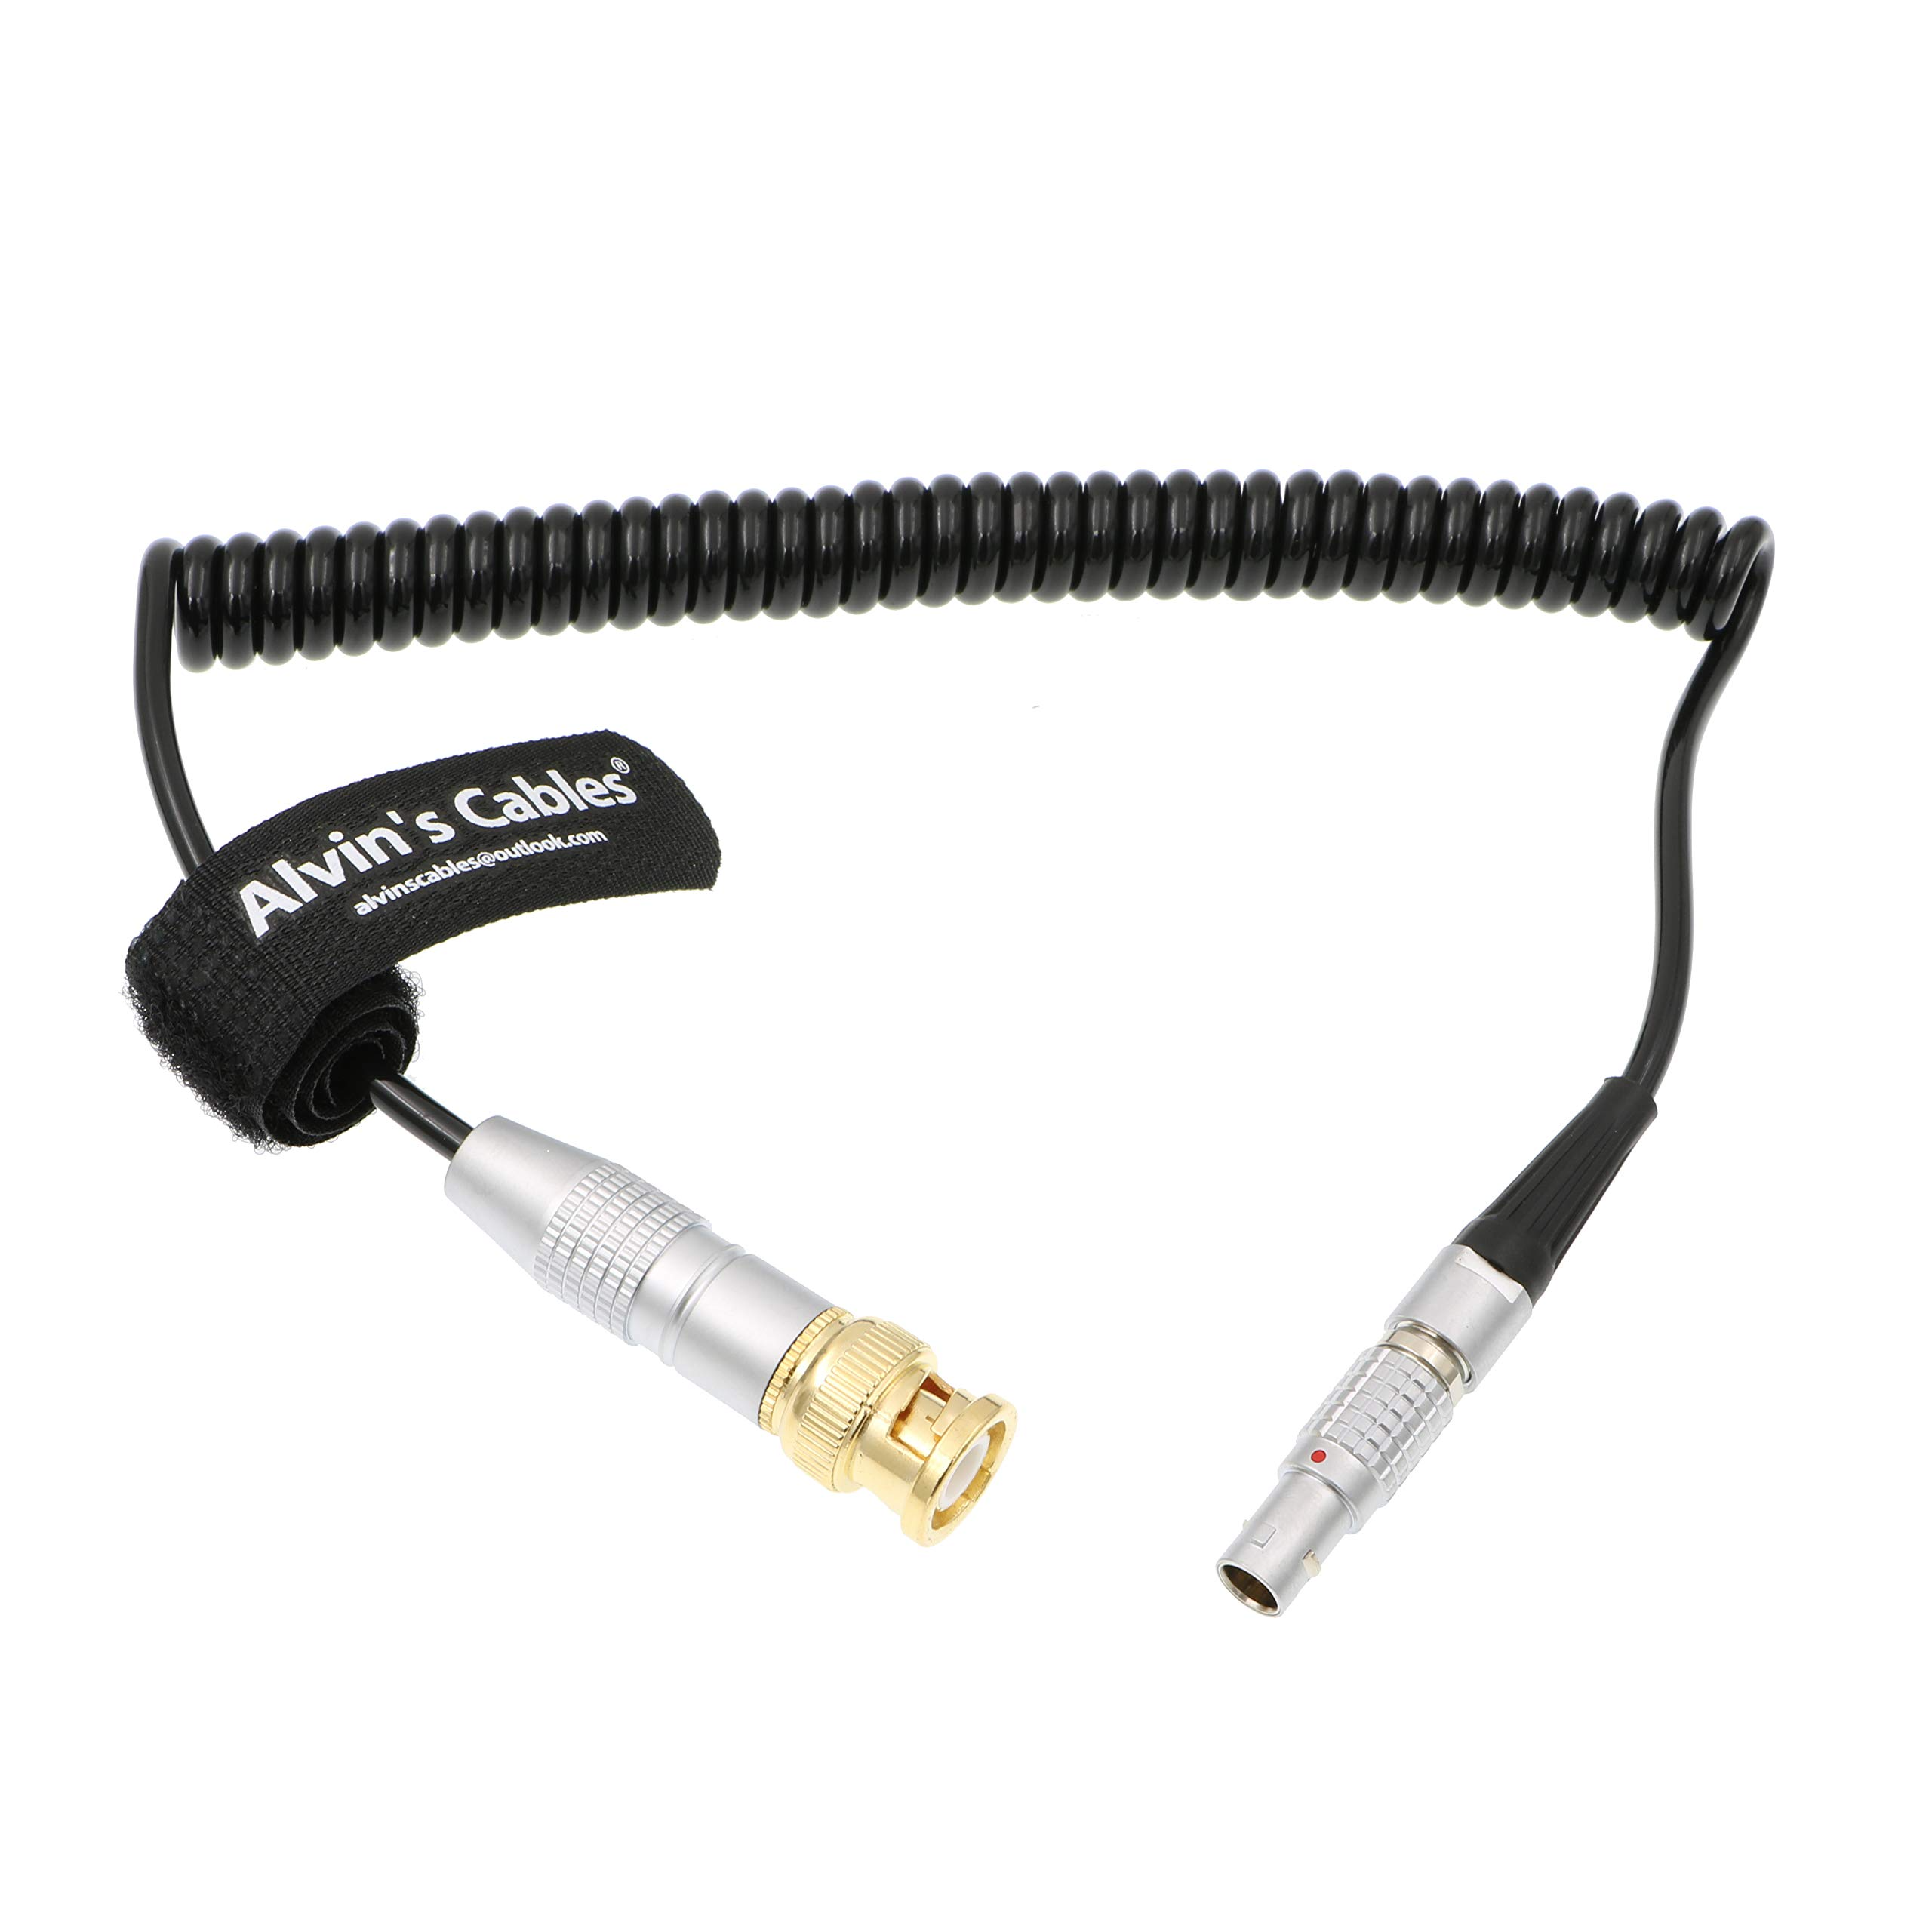 Alvin's Cables BNC to 5 Pin Right Angle Time Code Cable for ARRI Mini Sound Devices ZAXCOM